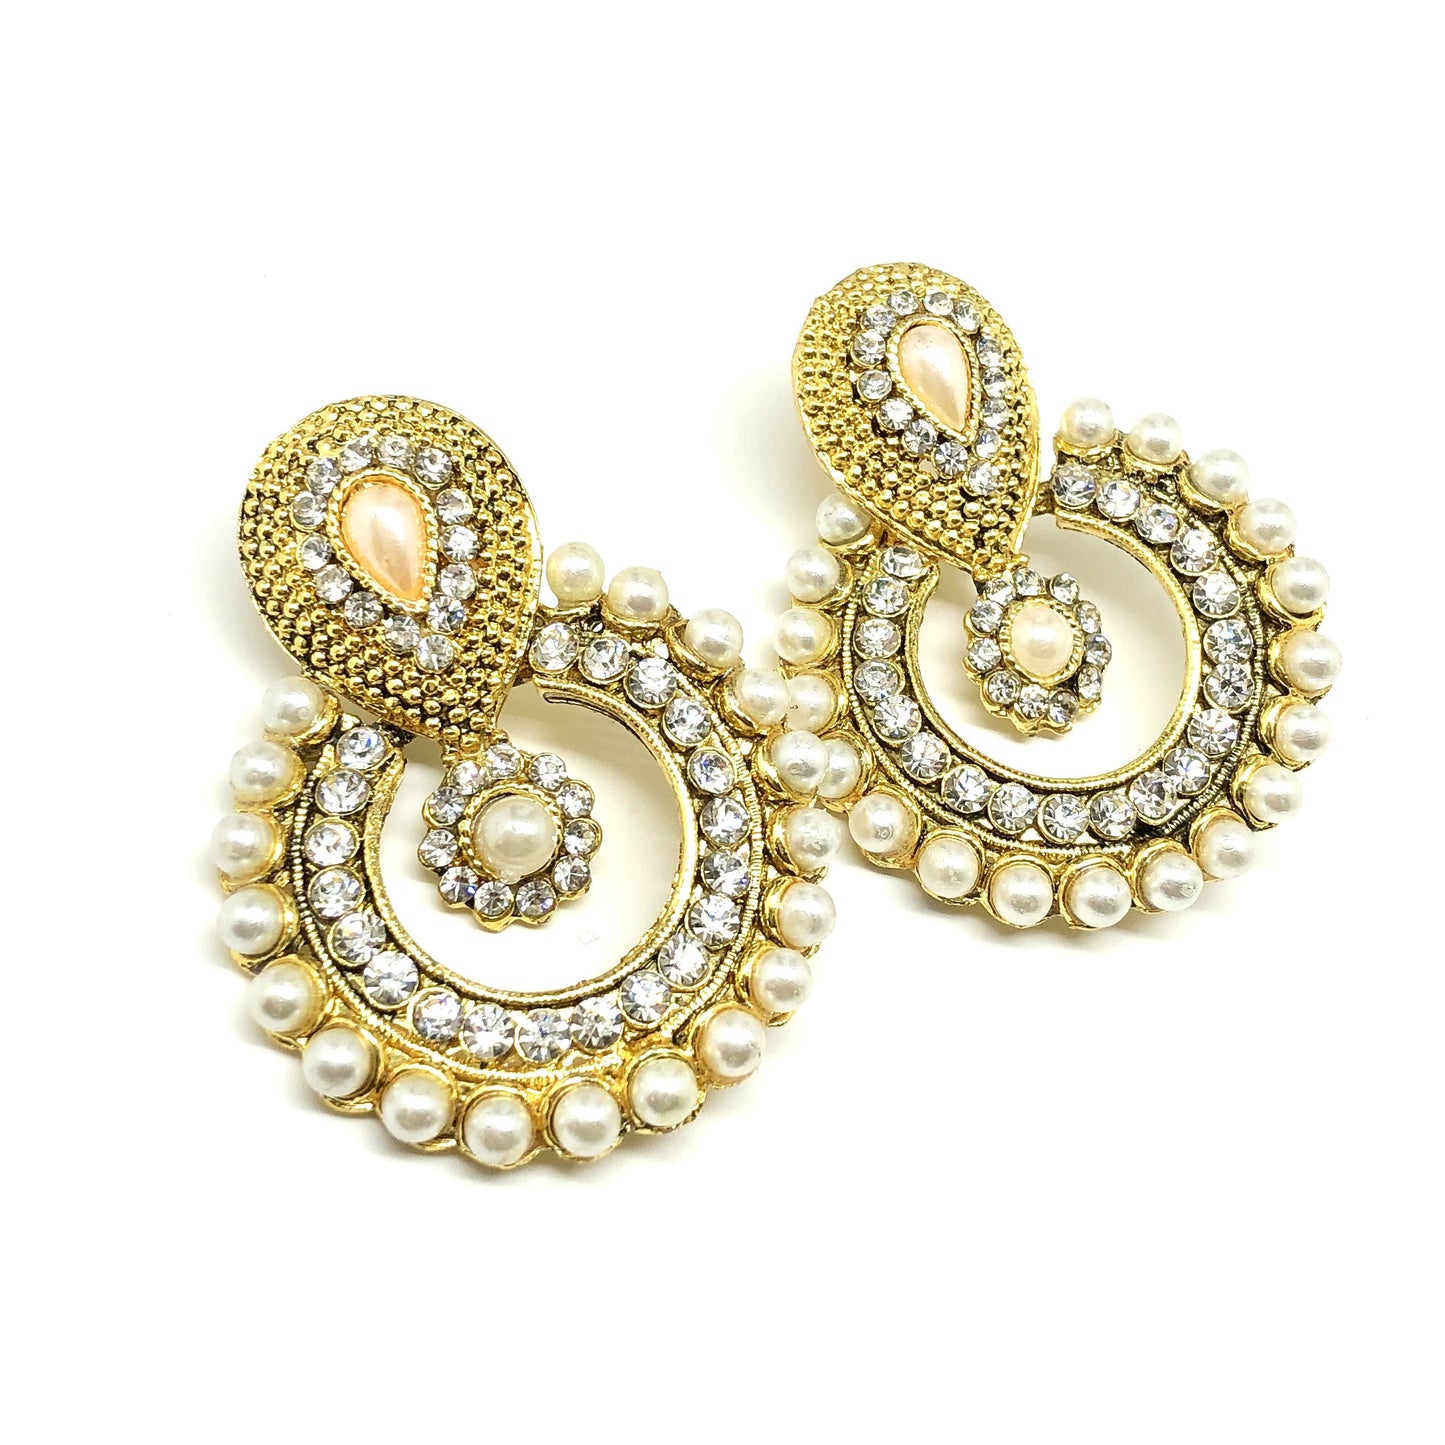 Big Bollywood Style Golden Halo Pearl Earrings